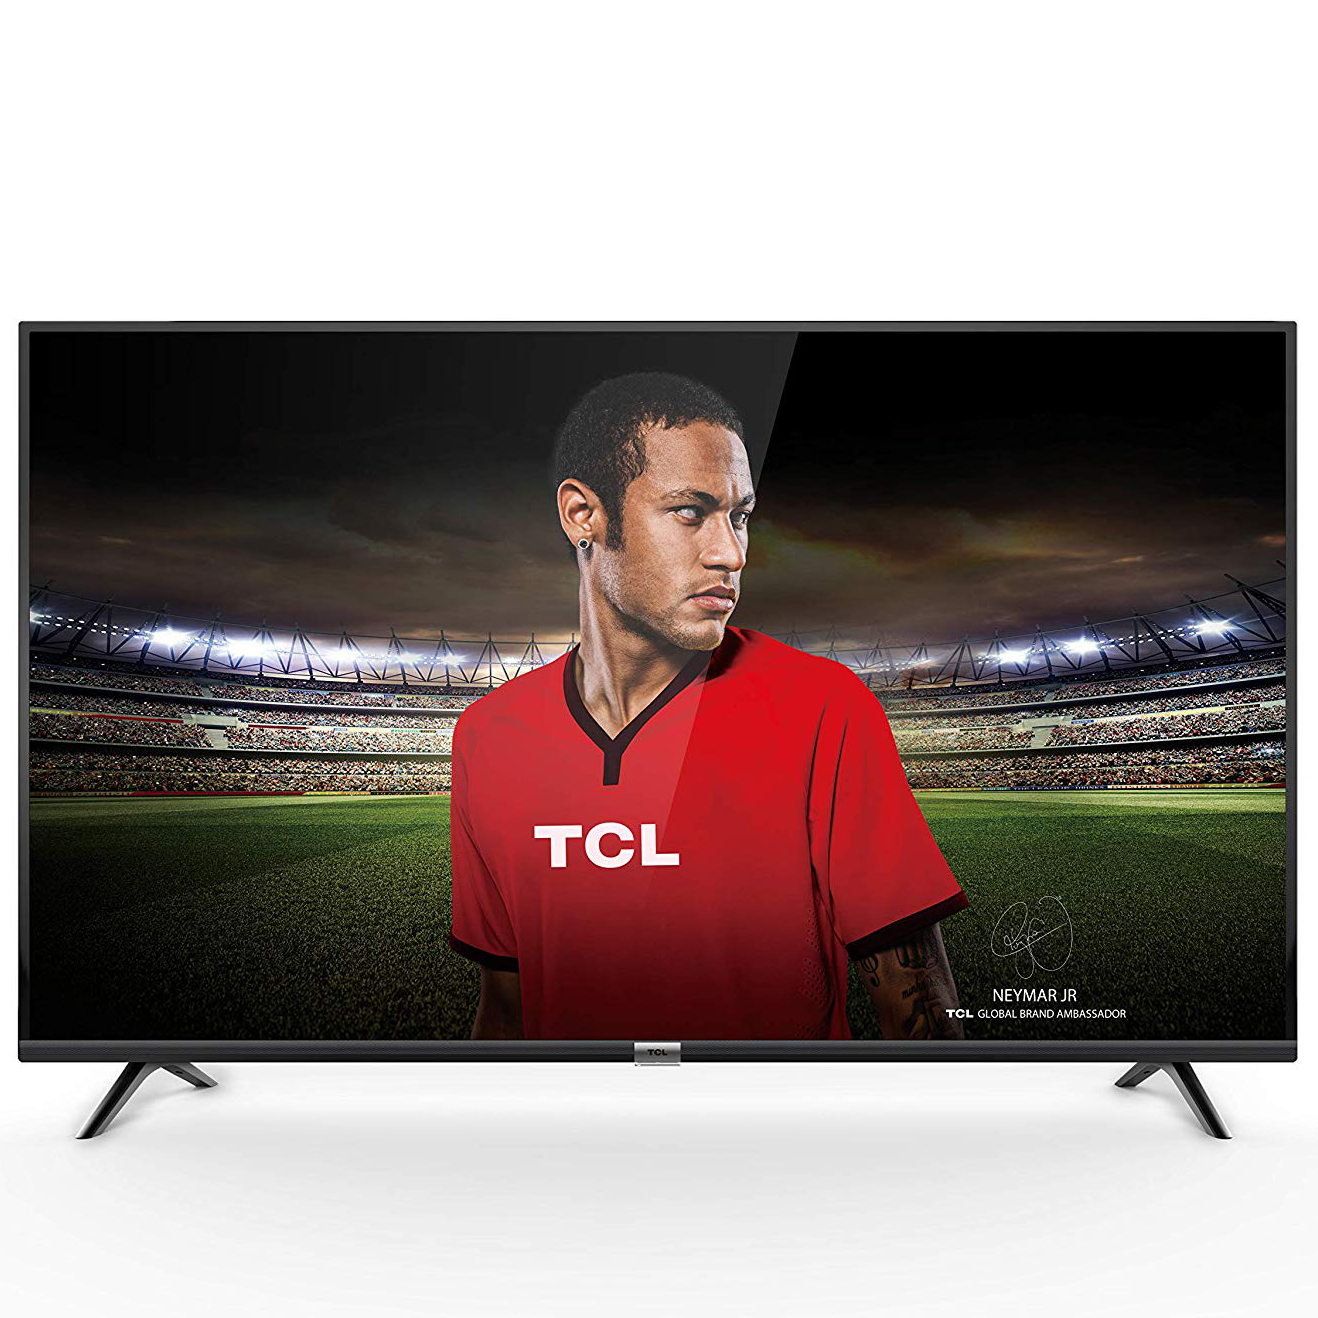 55 inch TCL 4K TV now just £299 on Amazon Prime Day